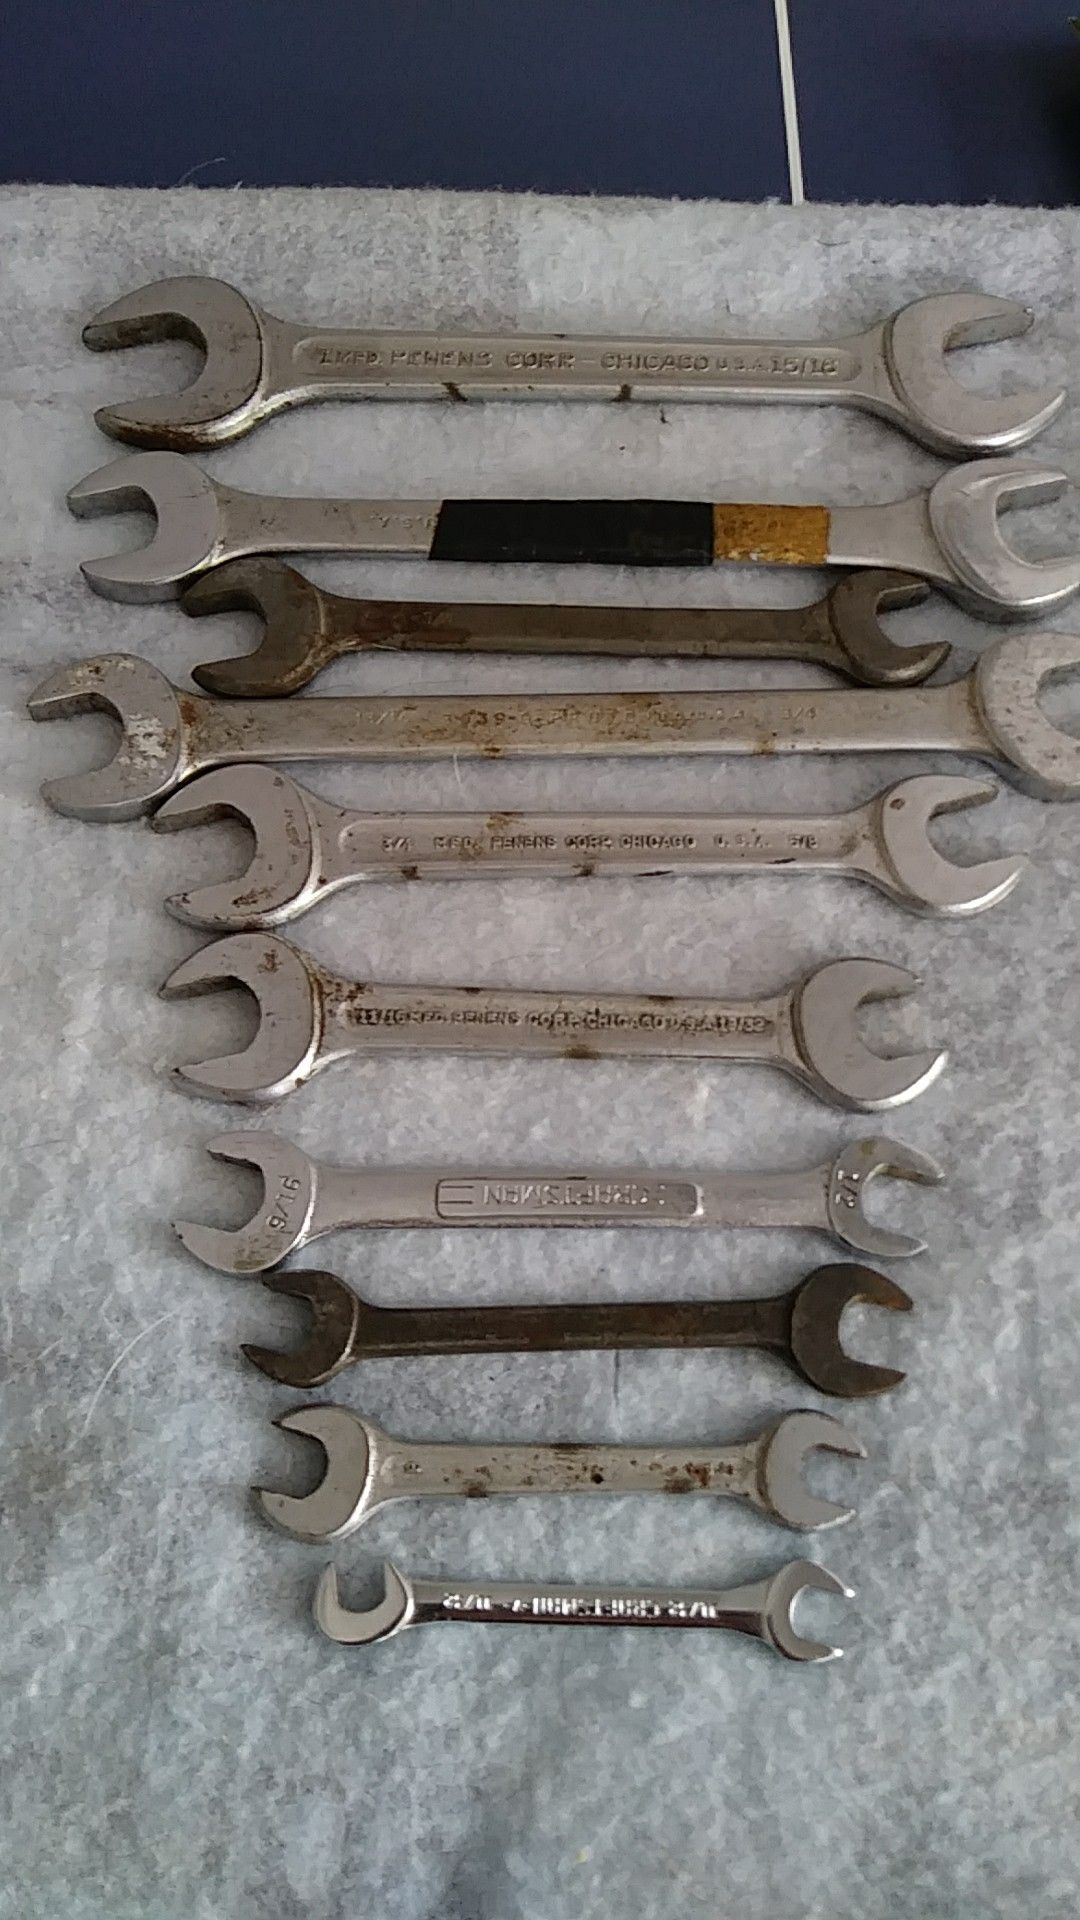 Open ended wrenches atandard